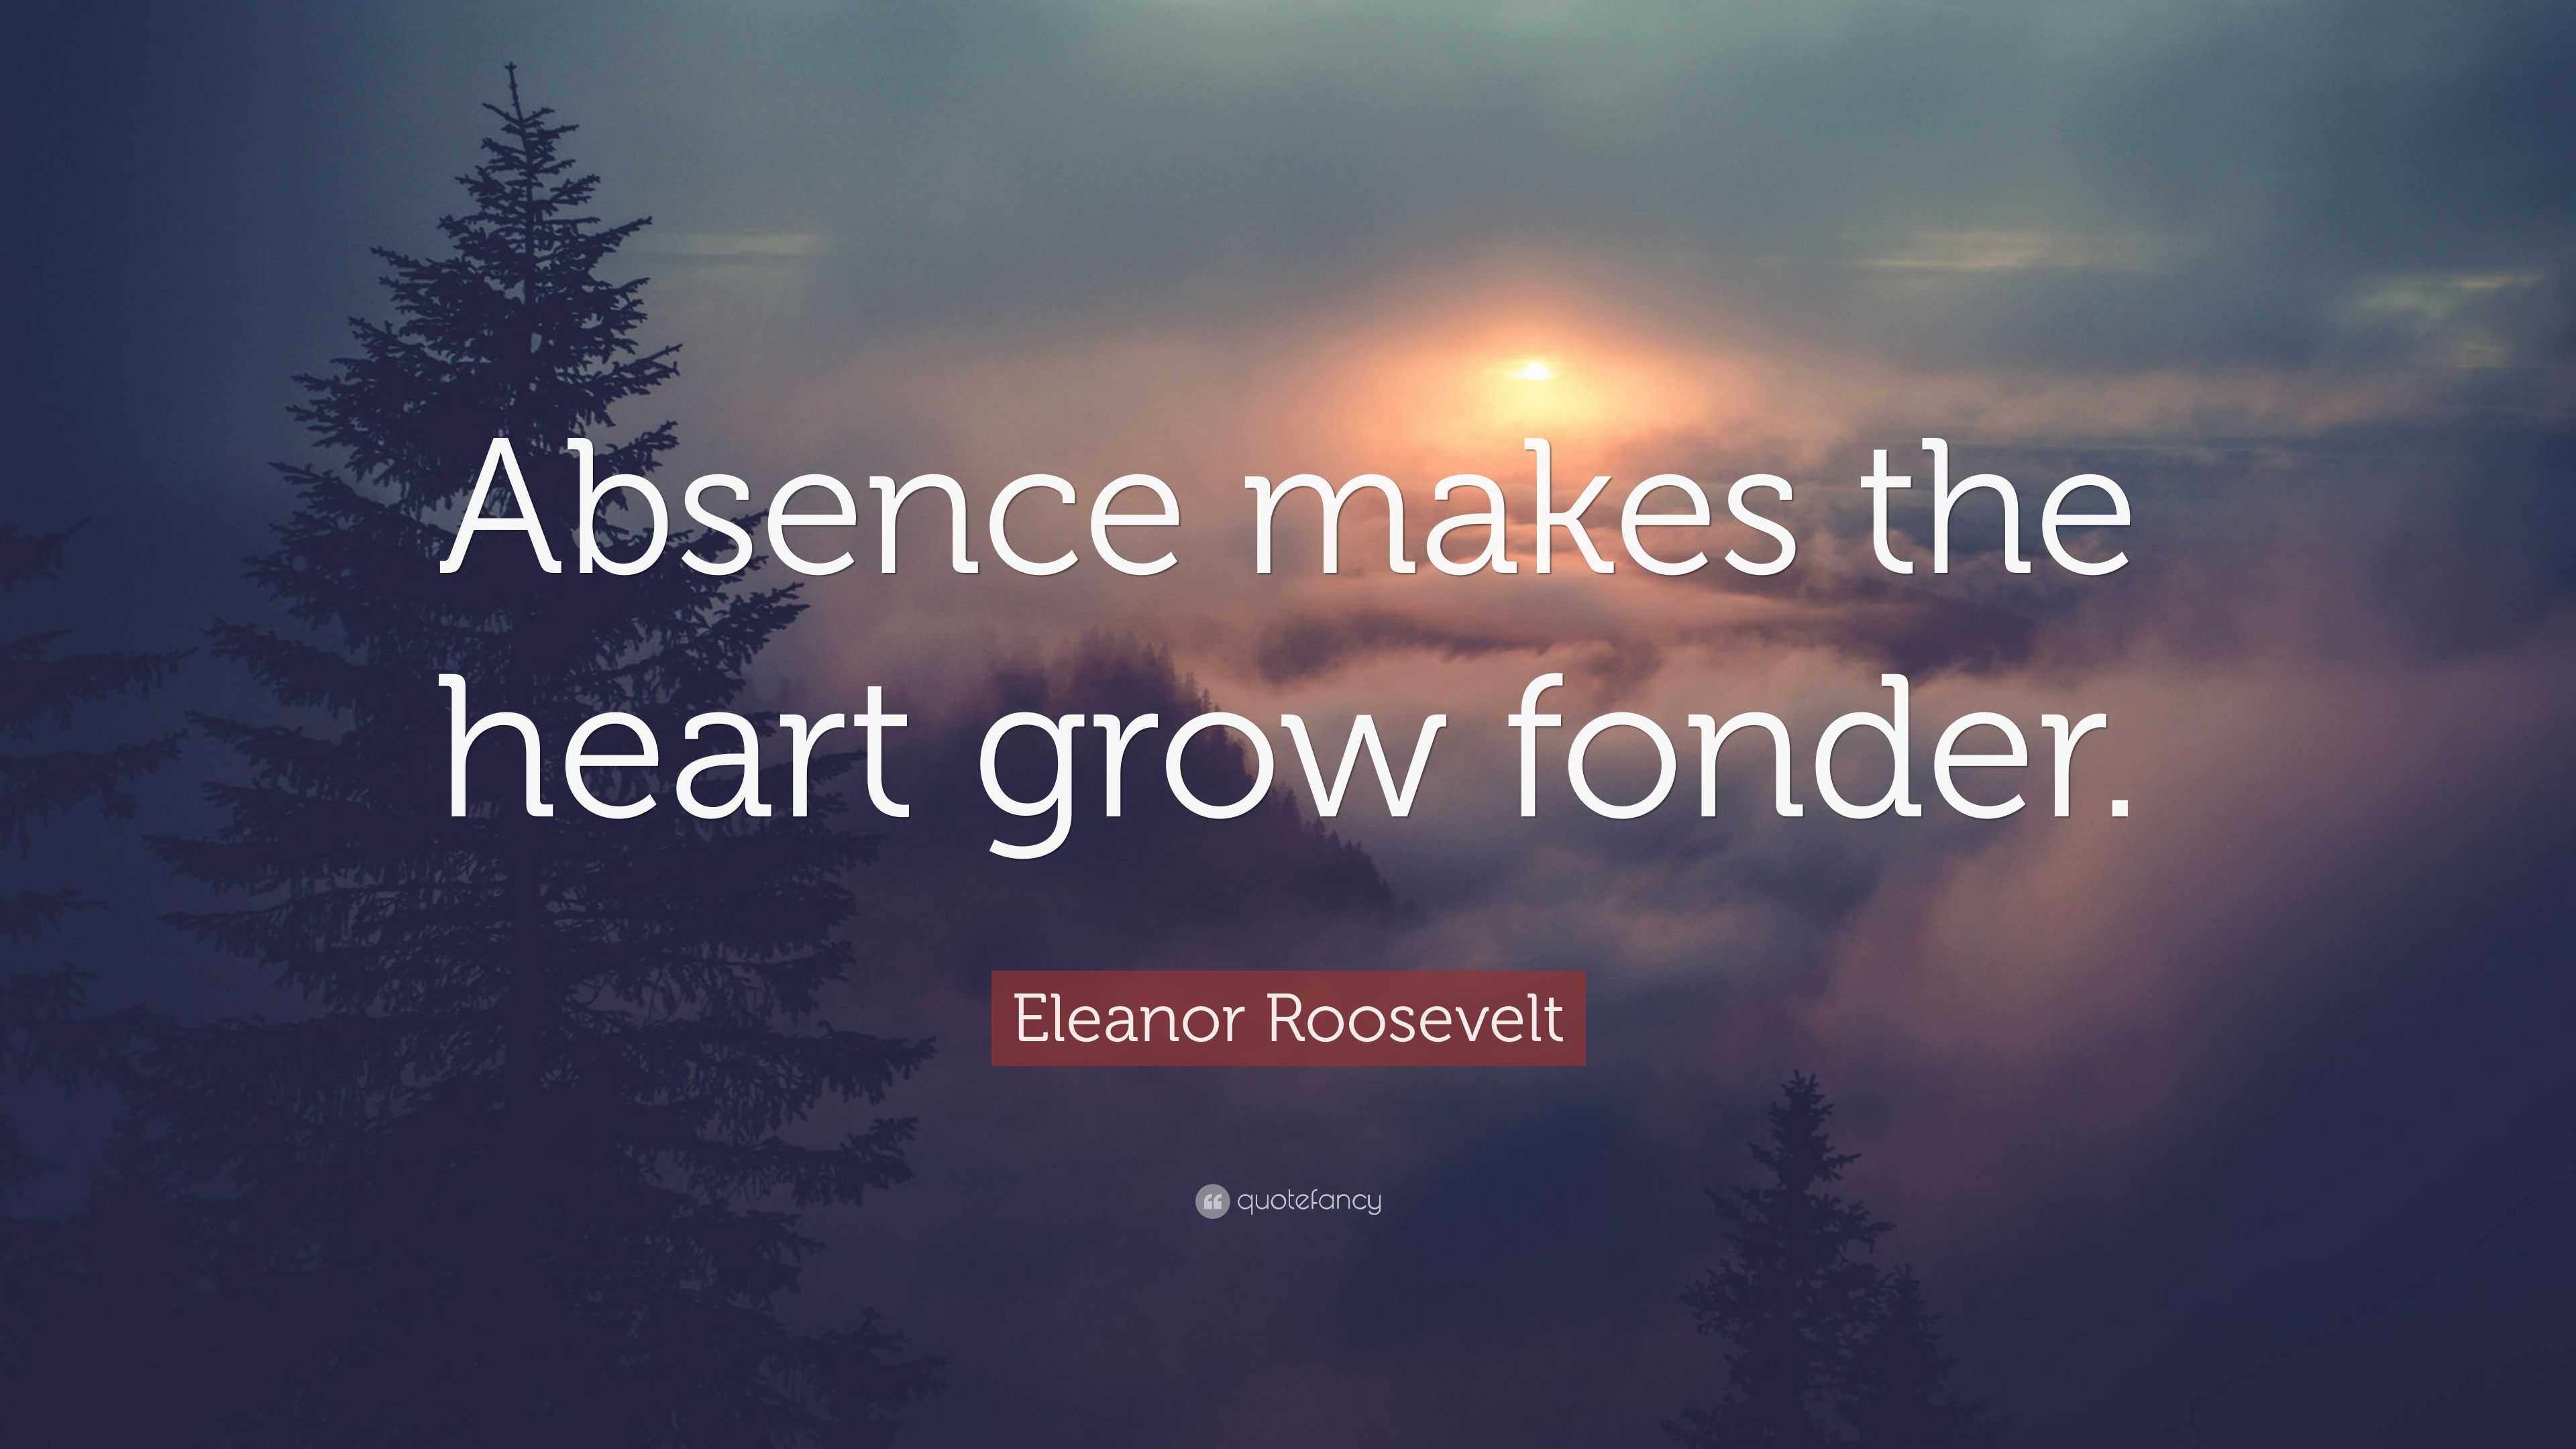 Eleanor Roosevelt Quote: “Absence makes the heart grow fonder.” (24